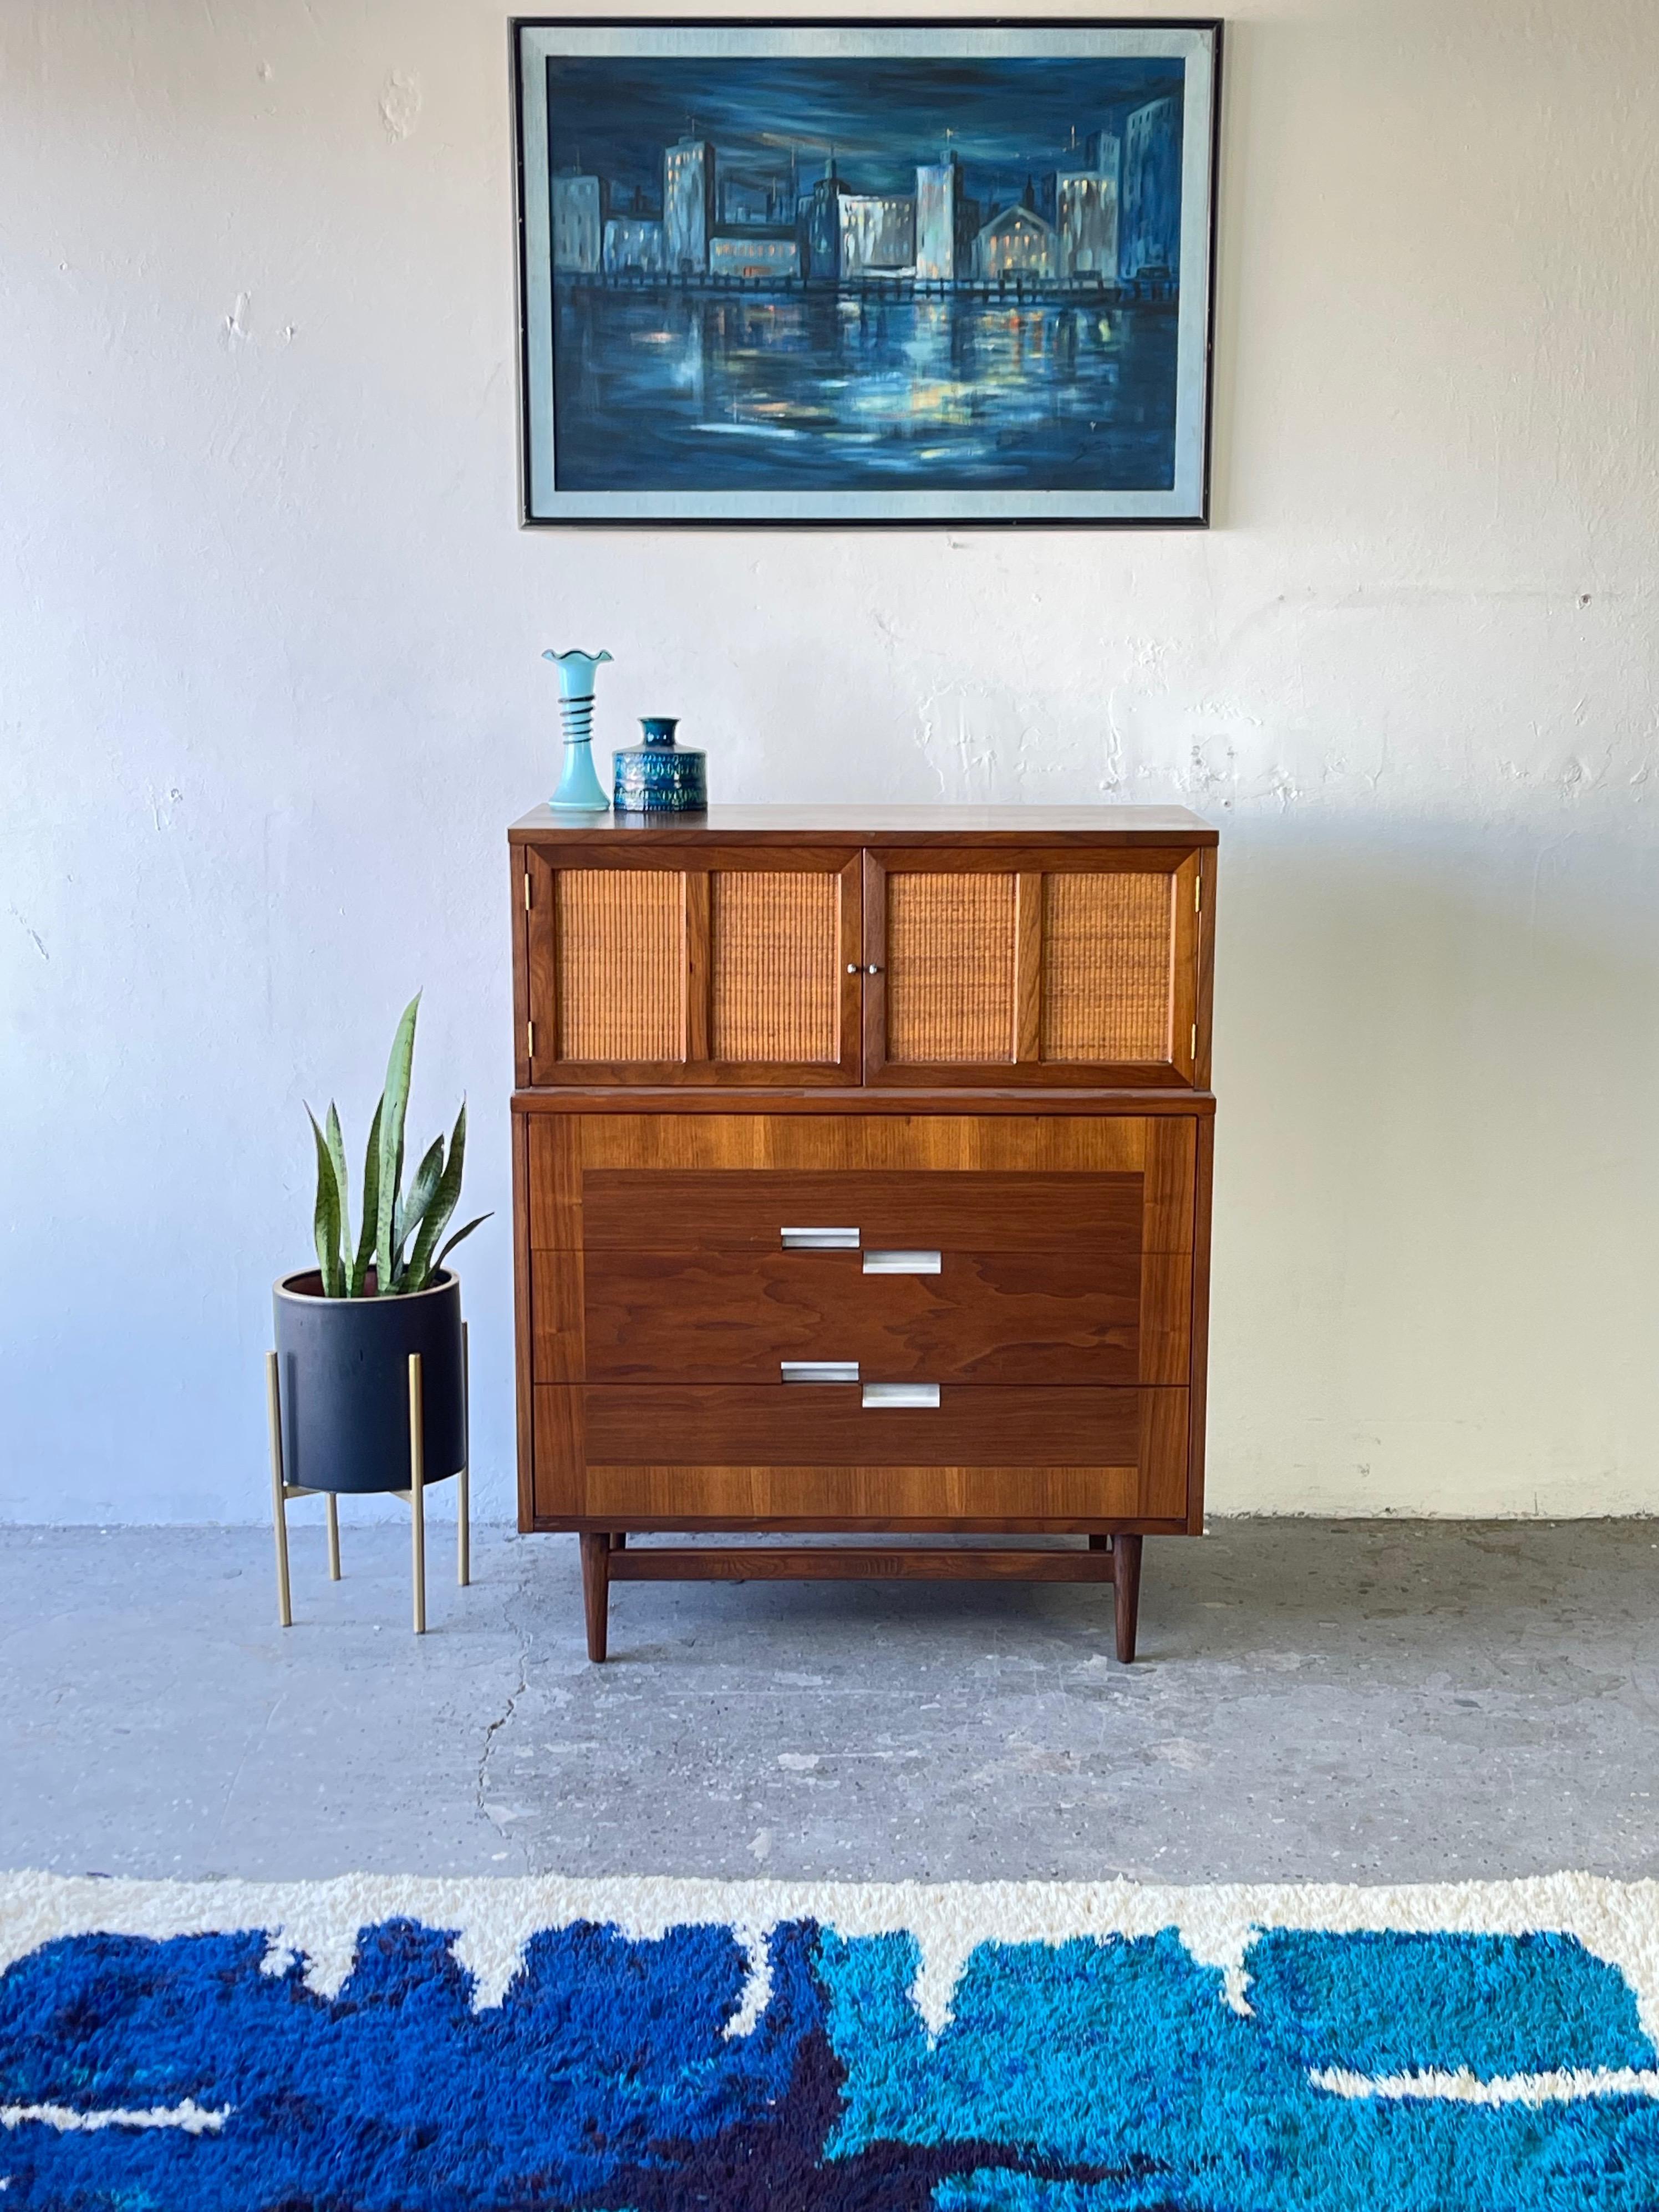 American of Martinsville walnut highboy Mid-Century Modern dresser from their Accord collection. Super cool wicker doors at top of dresser with two drawers inside.

Dresser has 3 drawers as well,

Good storage space with great brushed aluminum